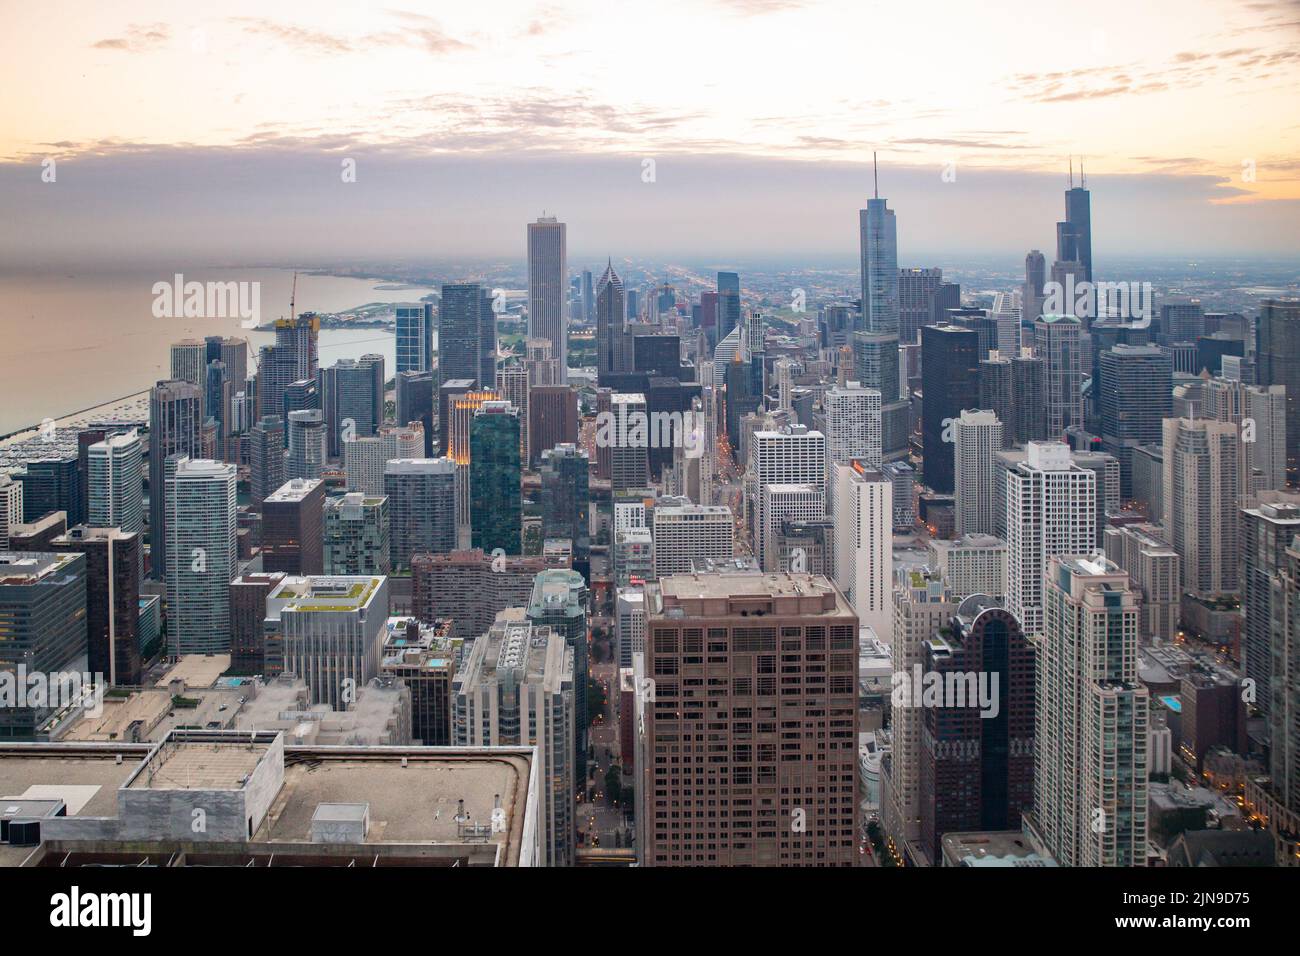 Chicago Illinois with modern buildings seen from above Stock Photo